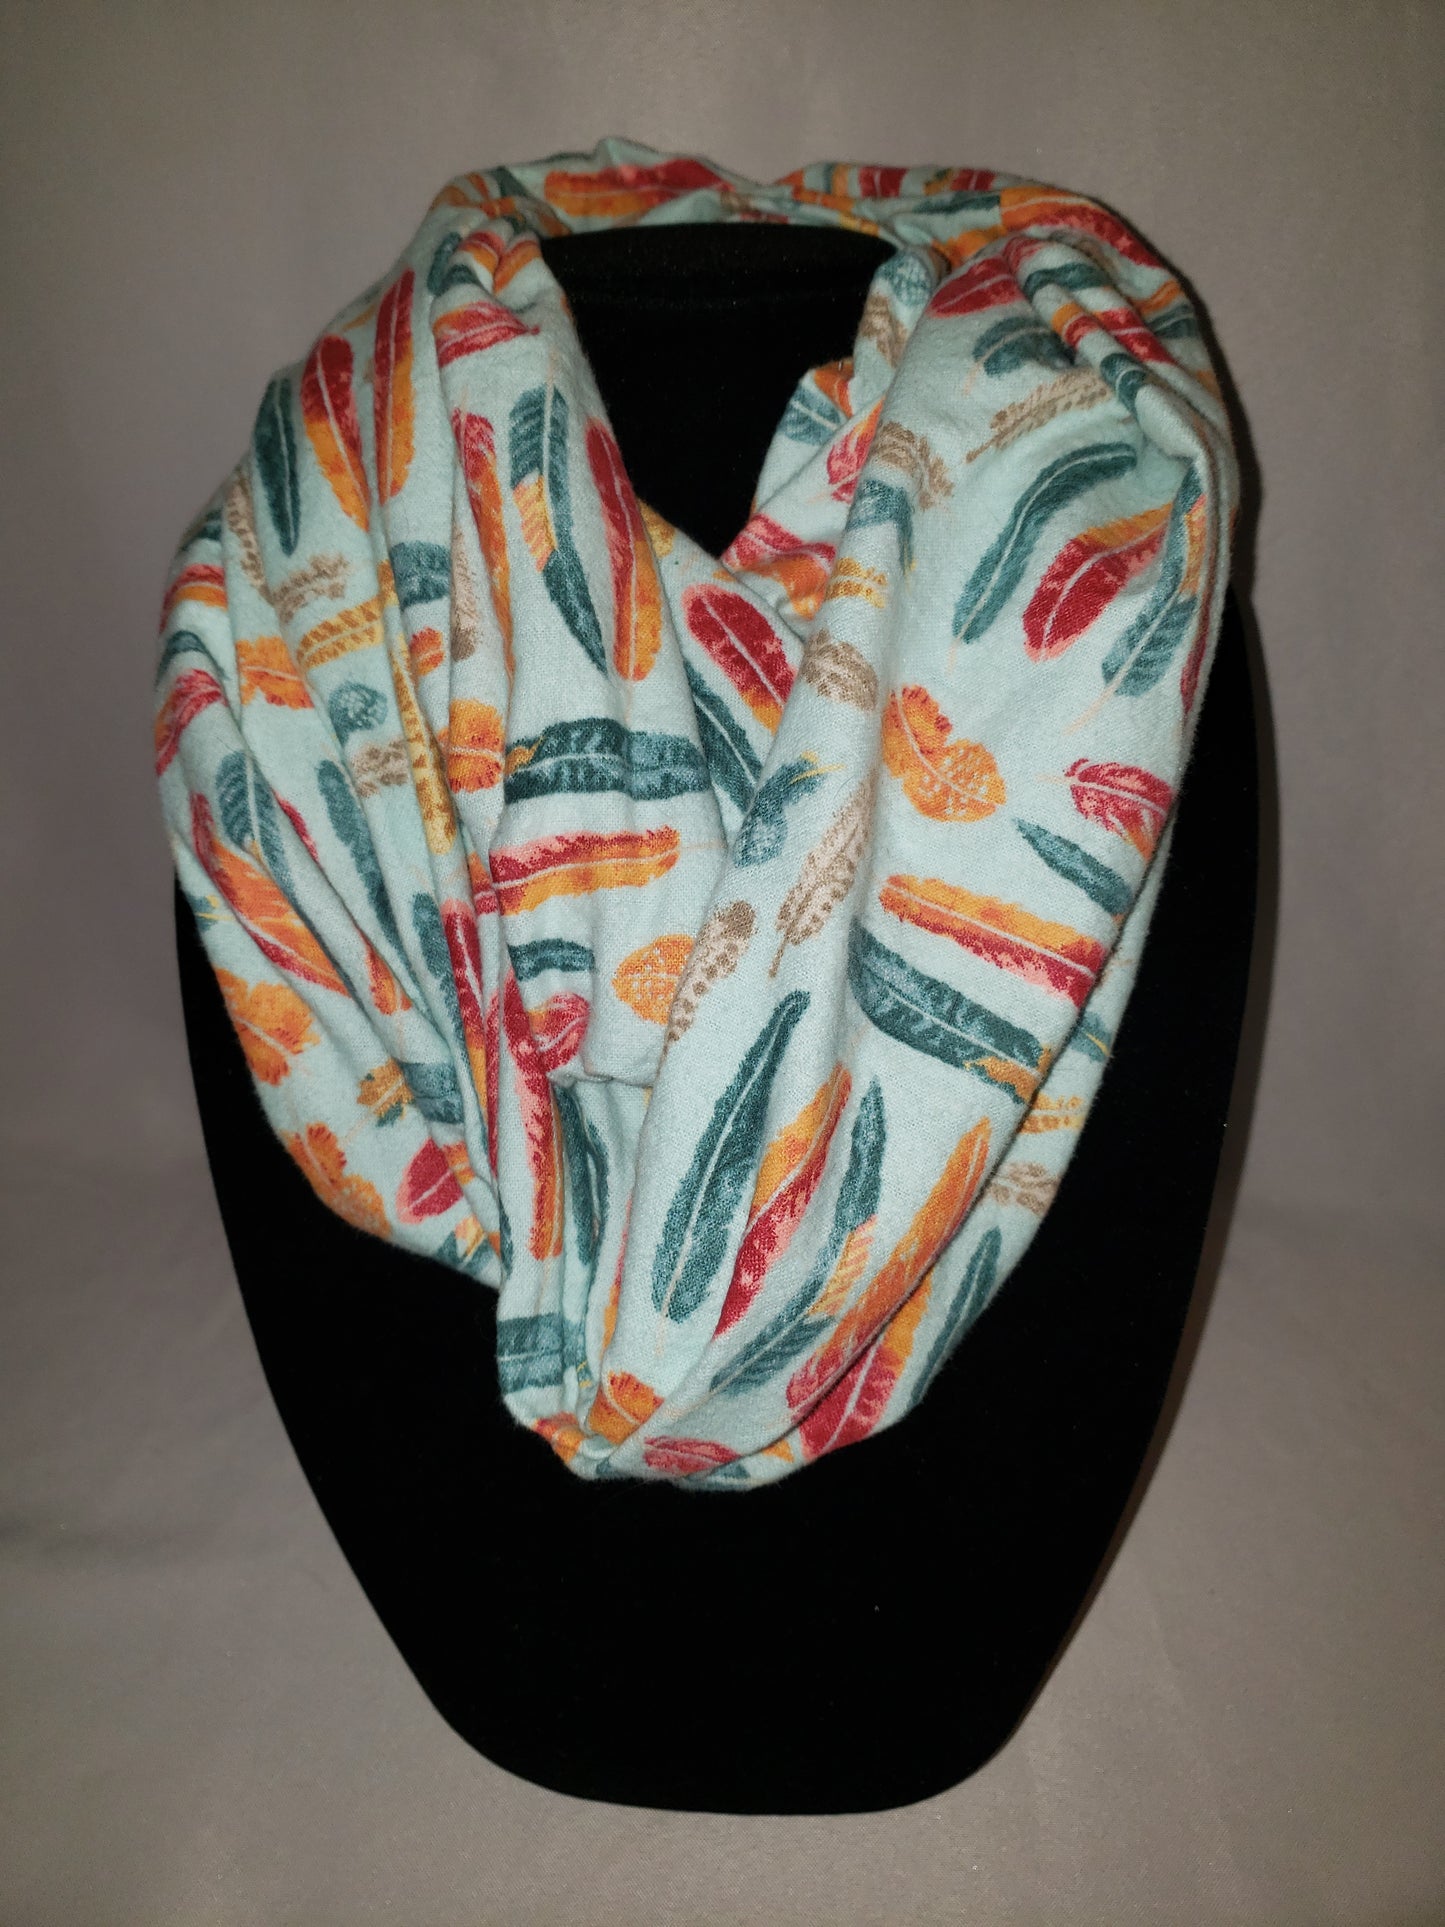 Flannel Infinity Stash Scarf in Feathers